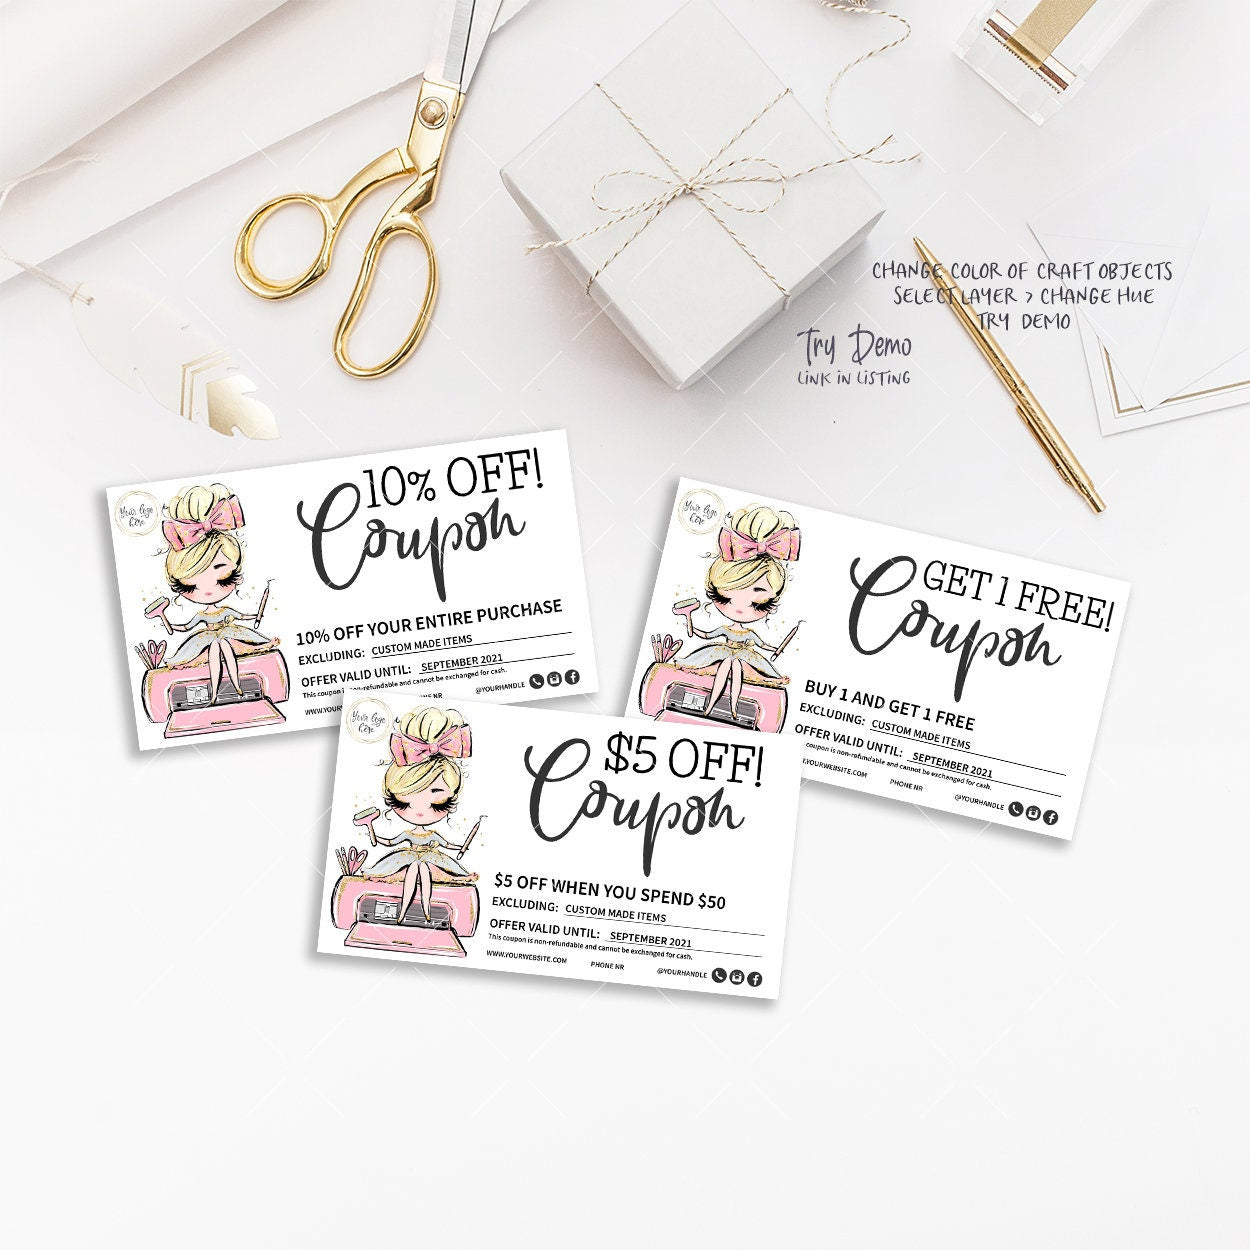 Handcrafter Business Coupons, Crafter Shop Gift Cards